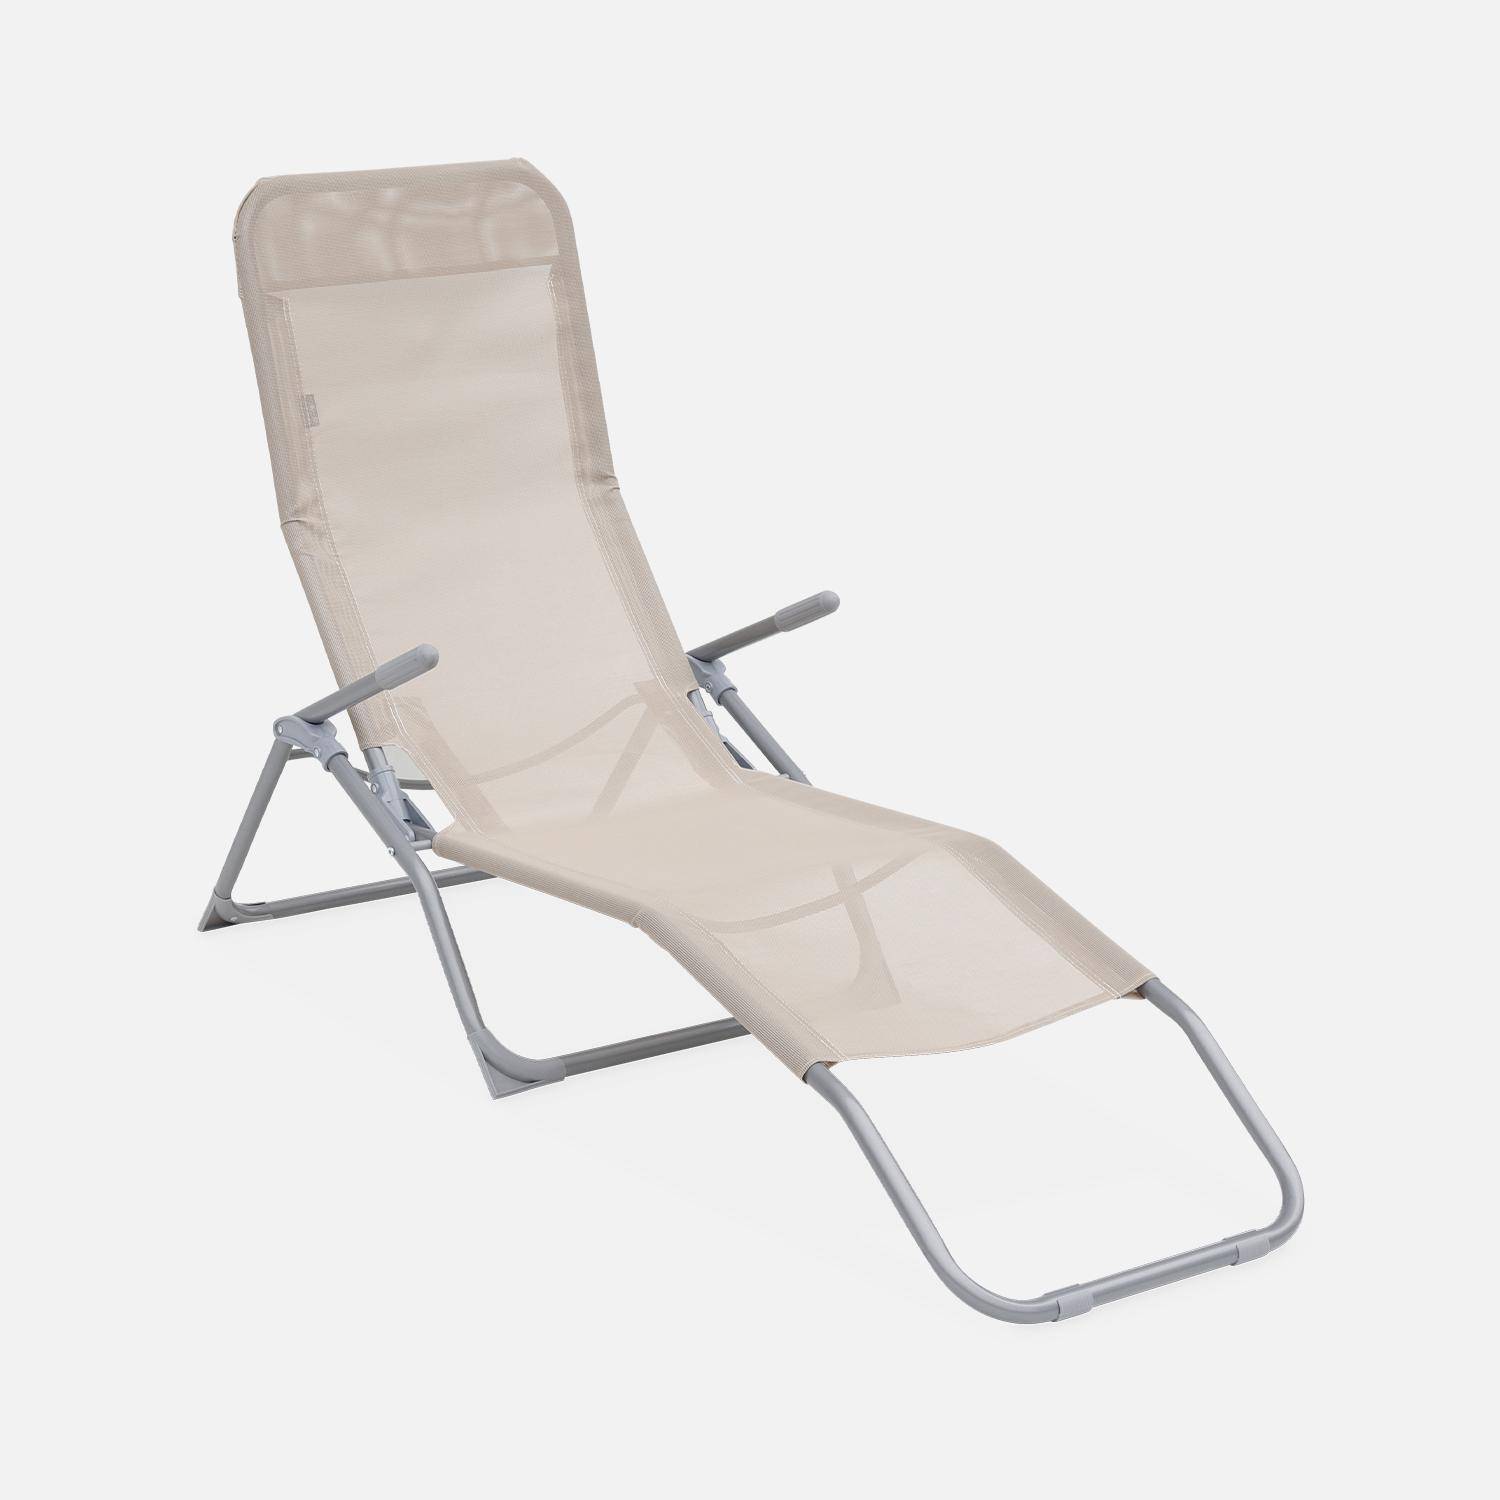 Set of 2 textilene sun loungers - 2 positions - Levito - Taupe Photo4